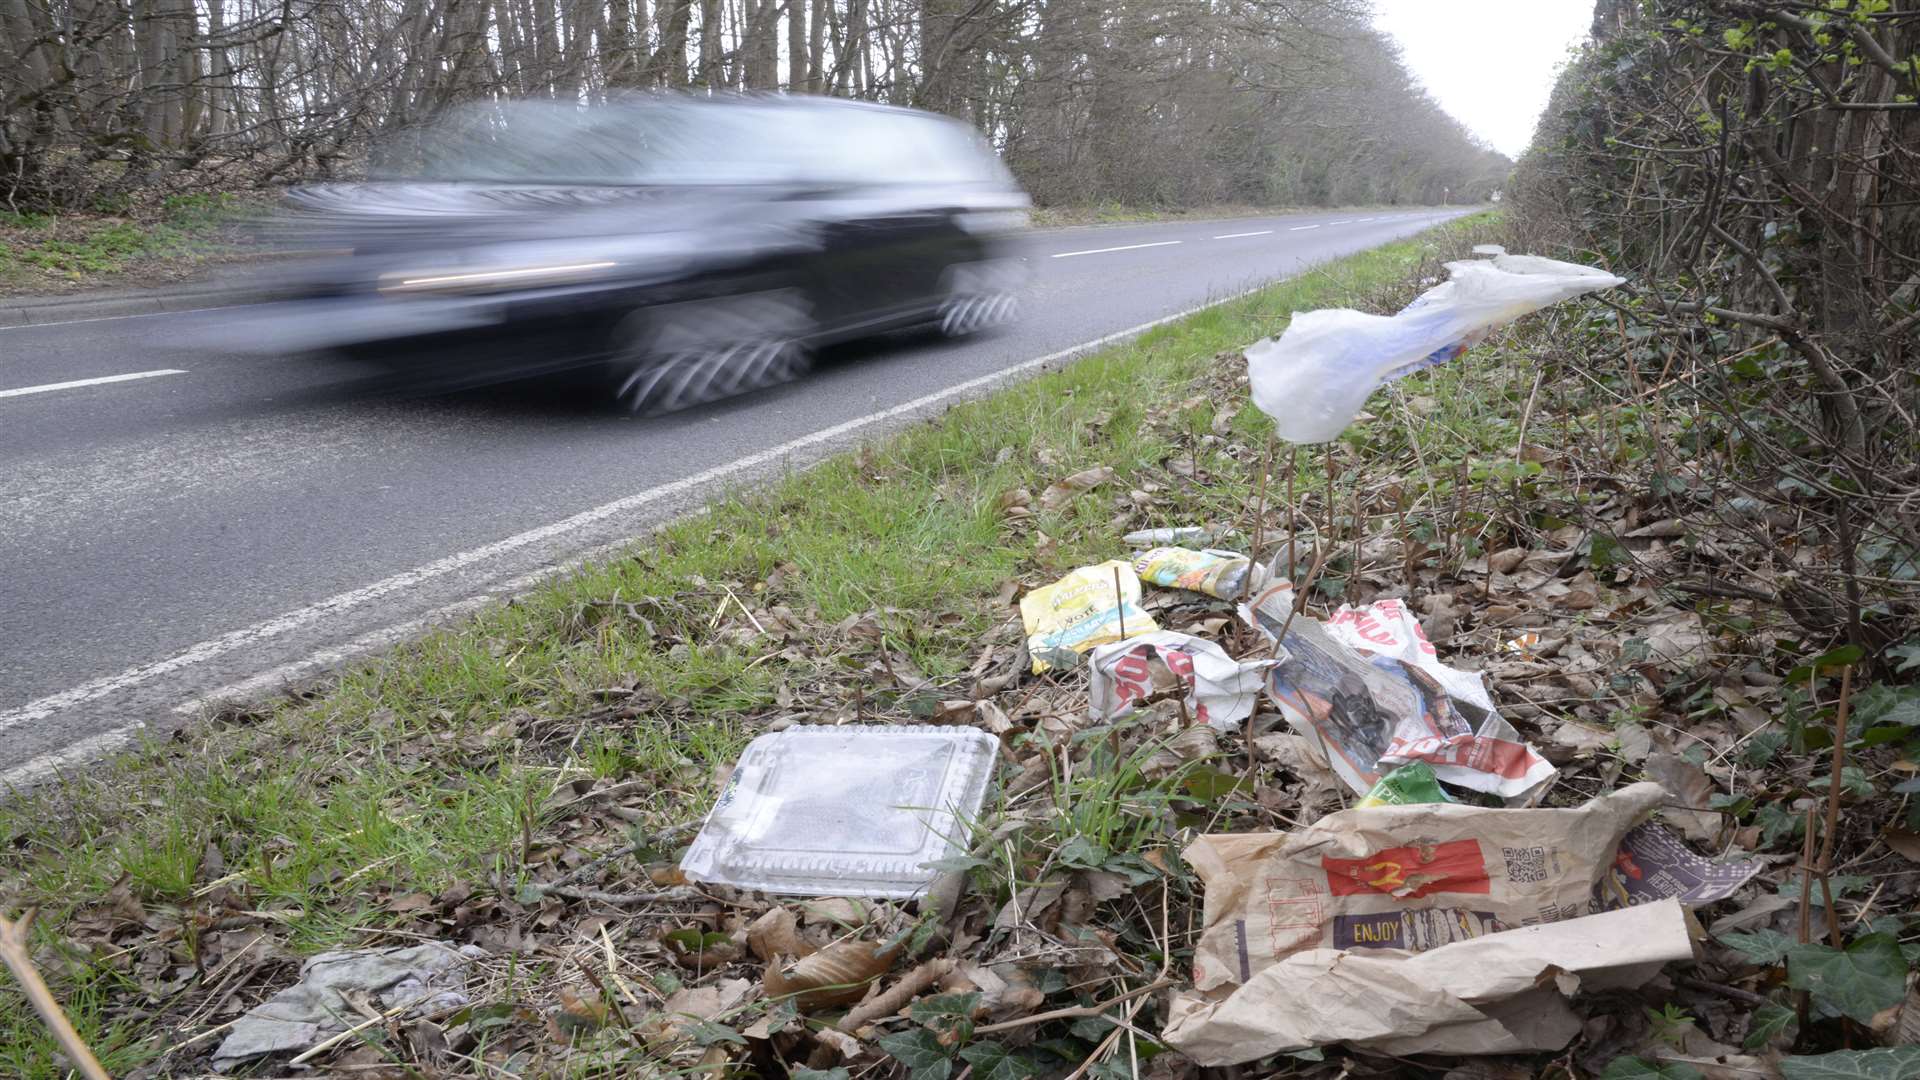 Litter on the verge of the A257 between Littlebourne and Canterbury